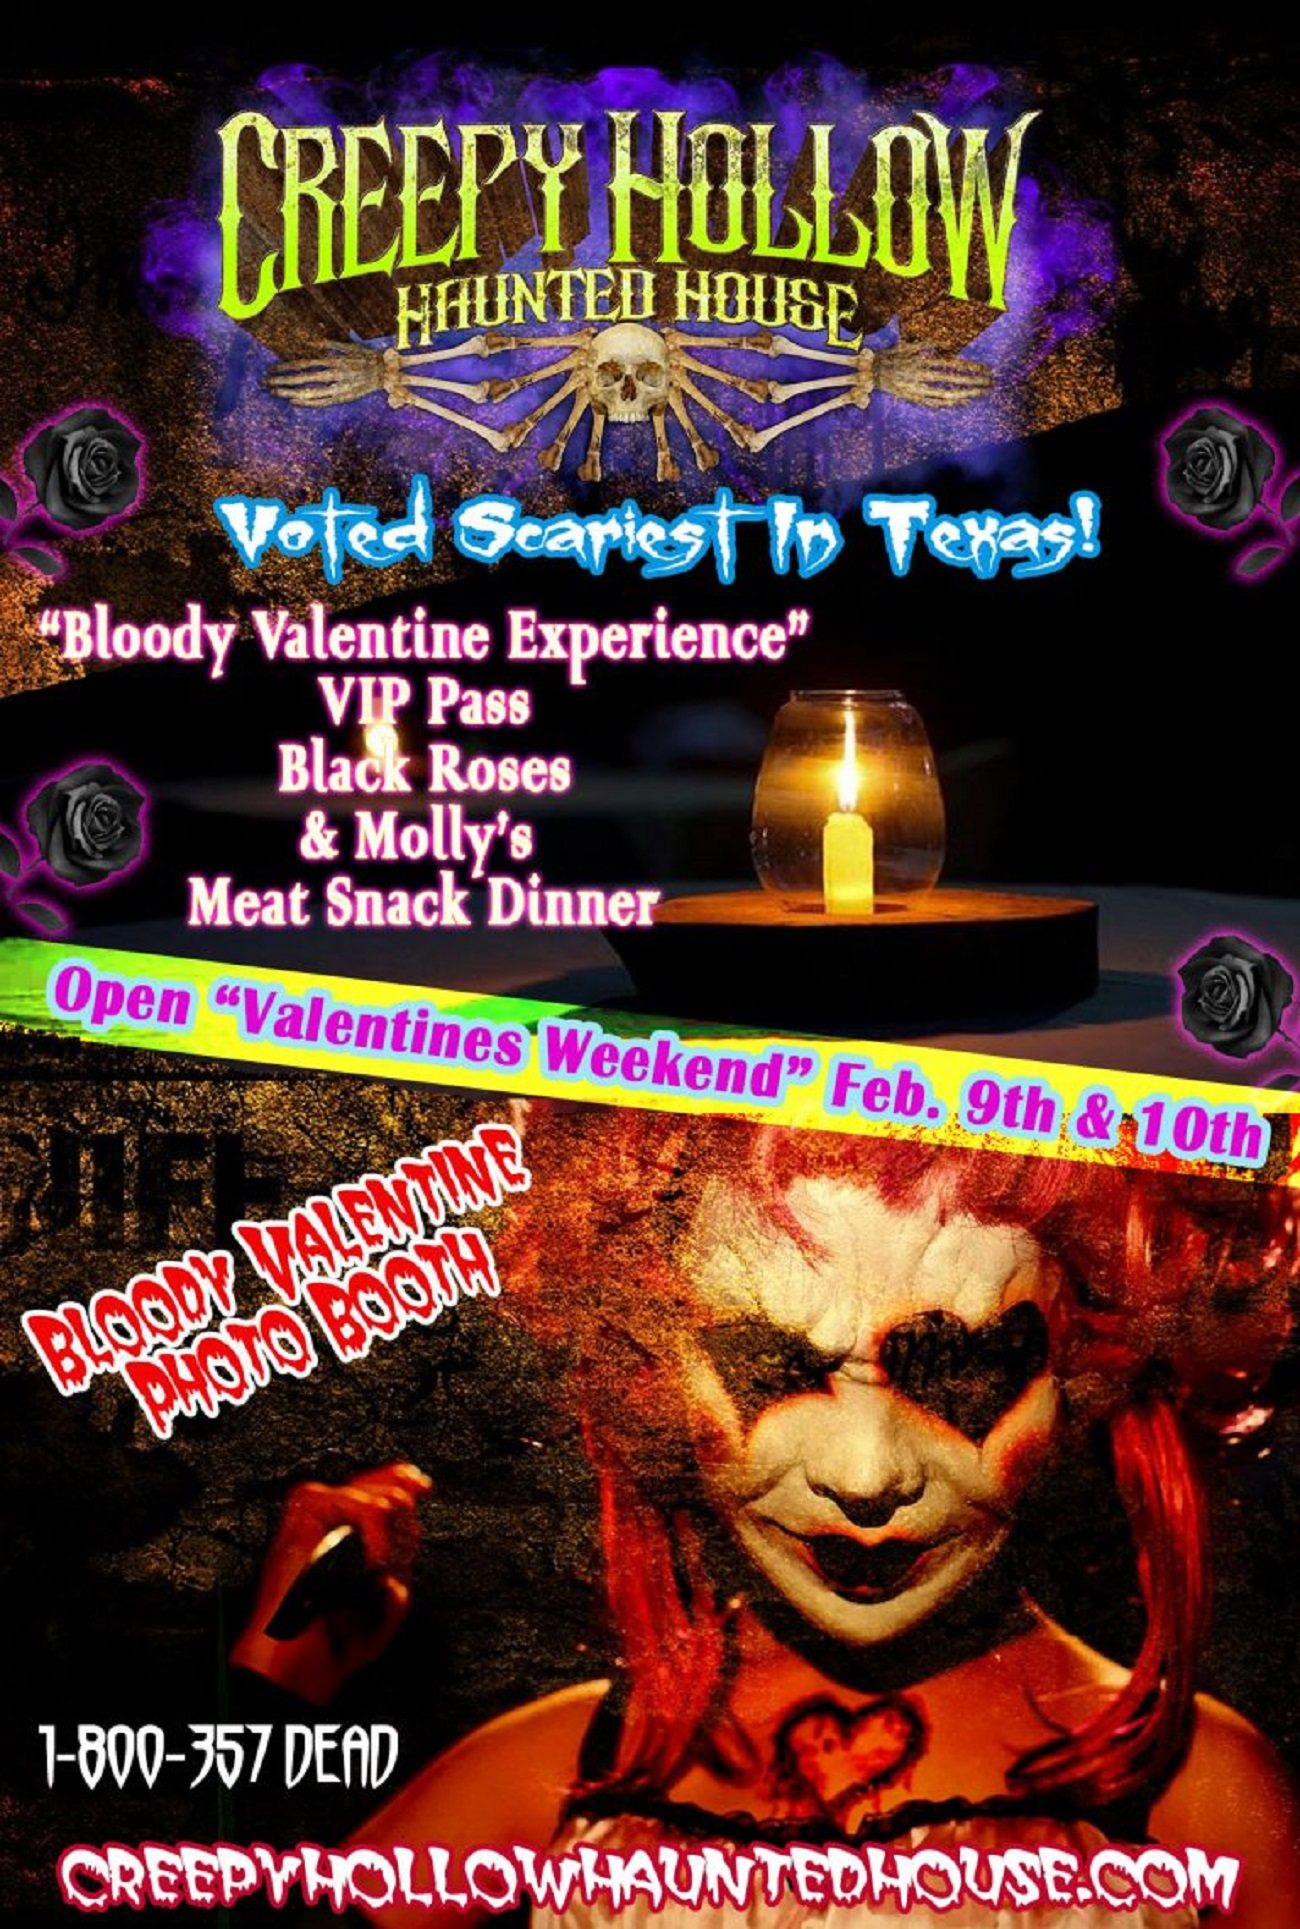 Bloody Valentine Experience Awaits You at Creepy Hollow Haunted House